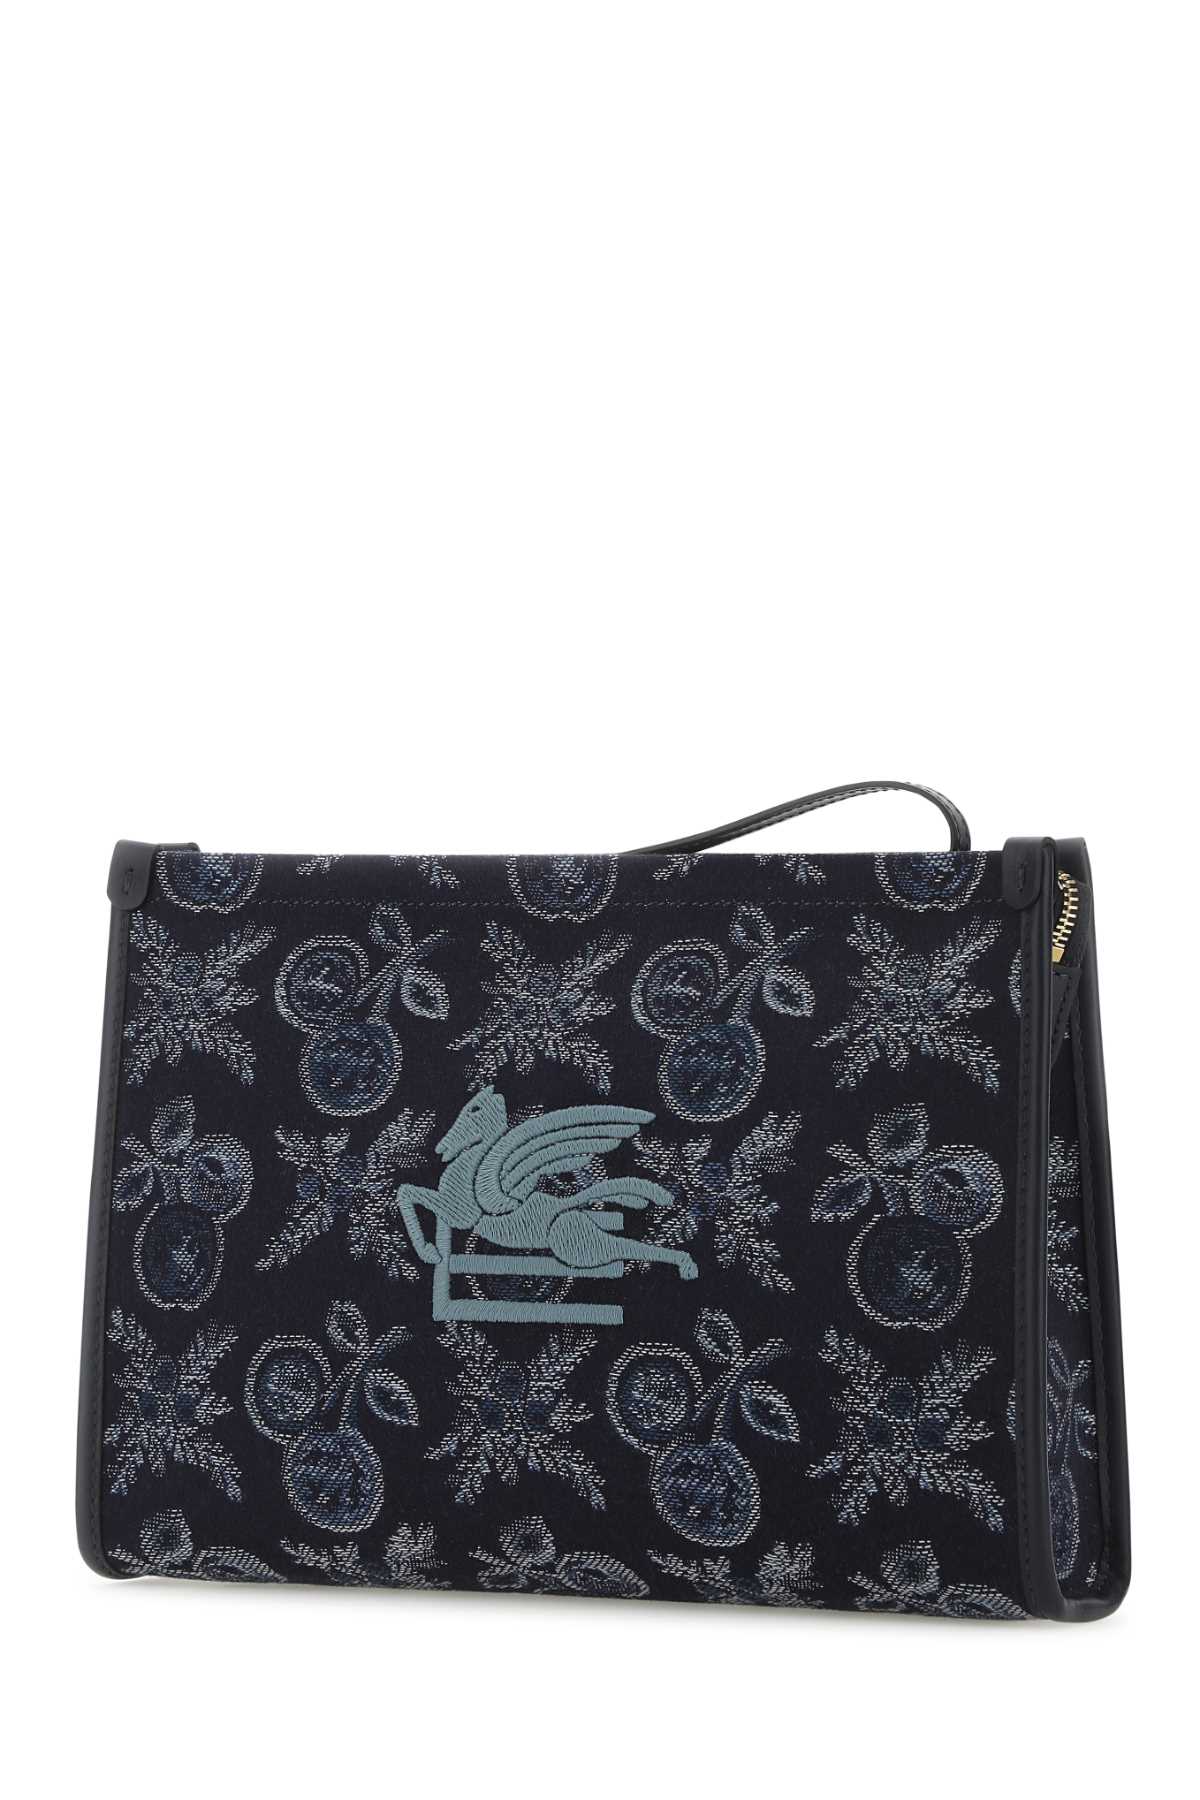 Etro Embroidered Canvas Beauty Case In Blue